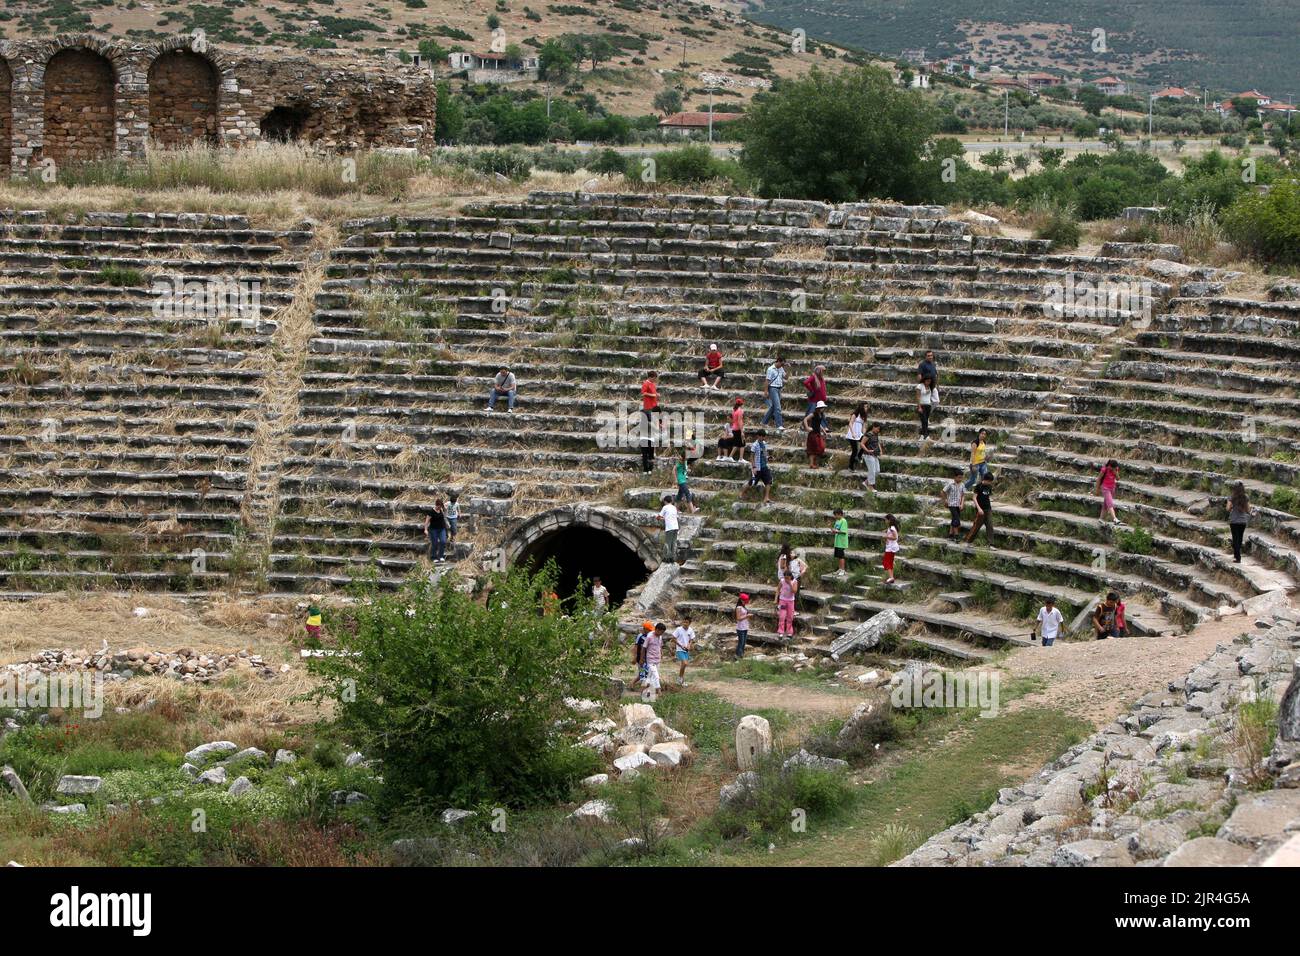 Visitors to the ancient site of Aphrodisias in Turkey climb amongst the ruins of the 30,000 seat stadium. Stock Photo